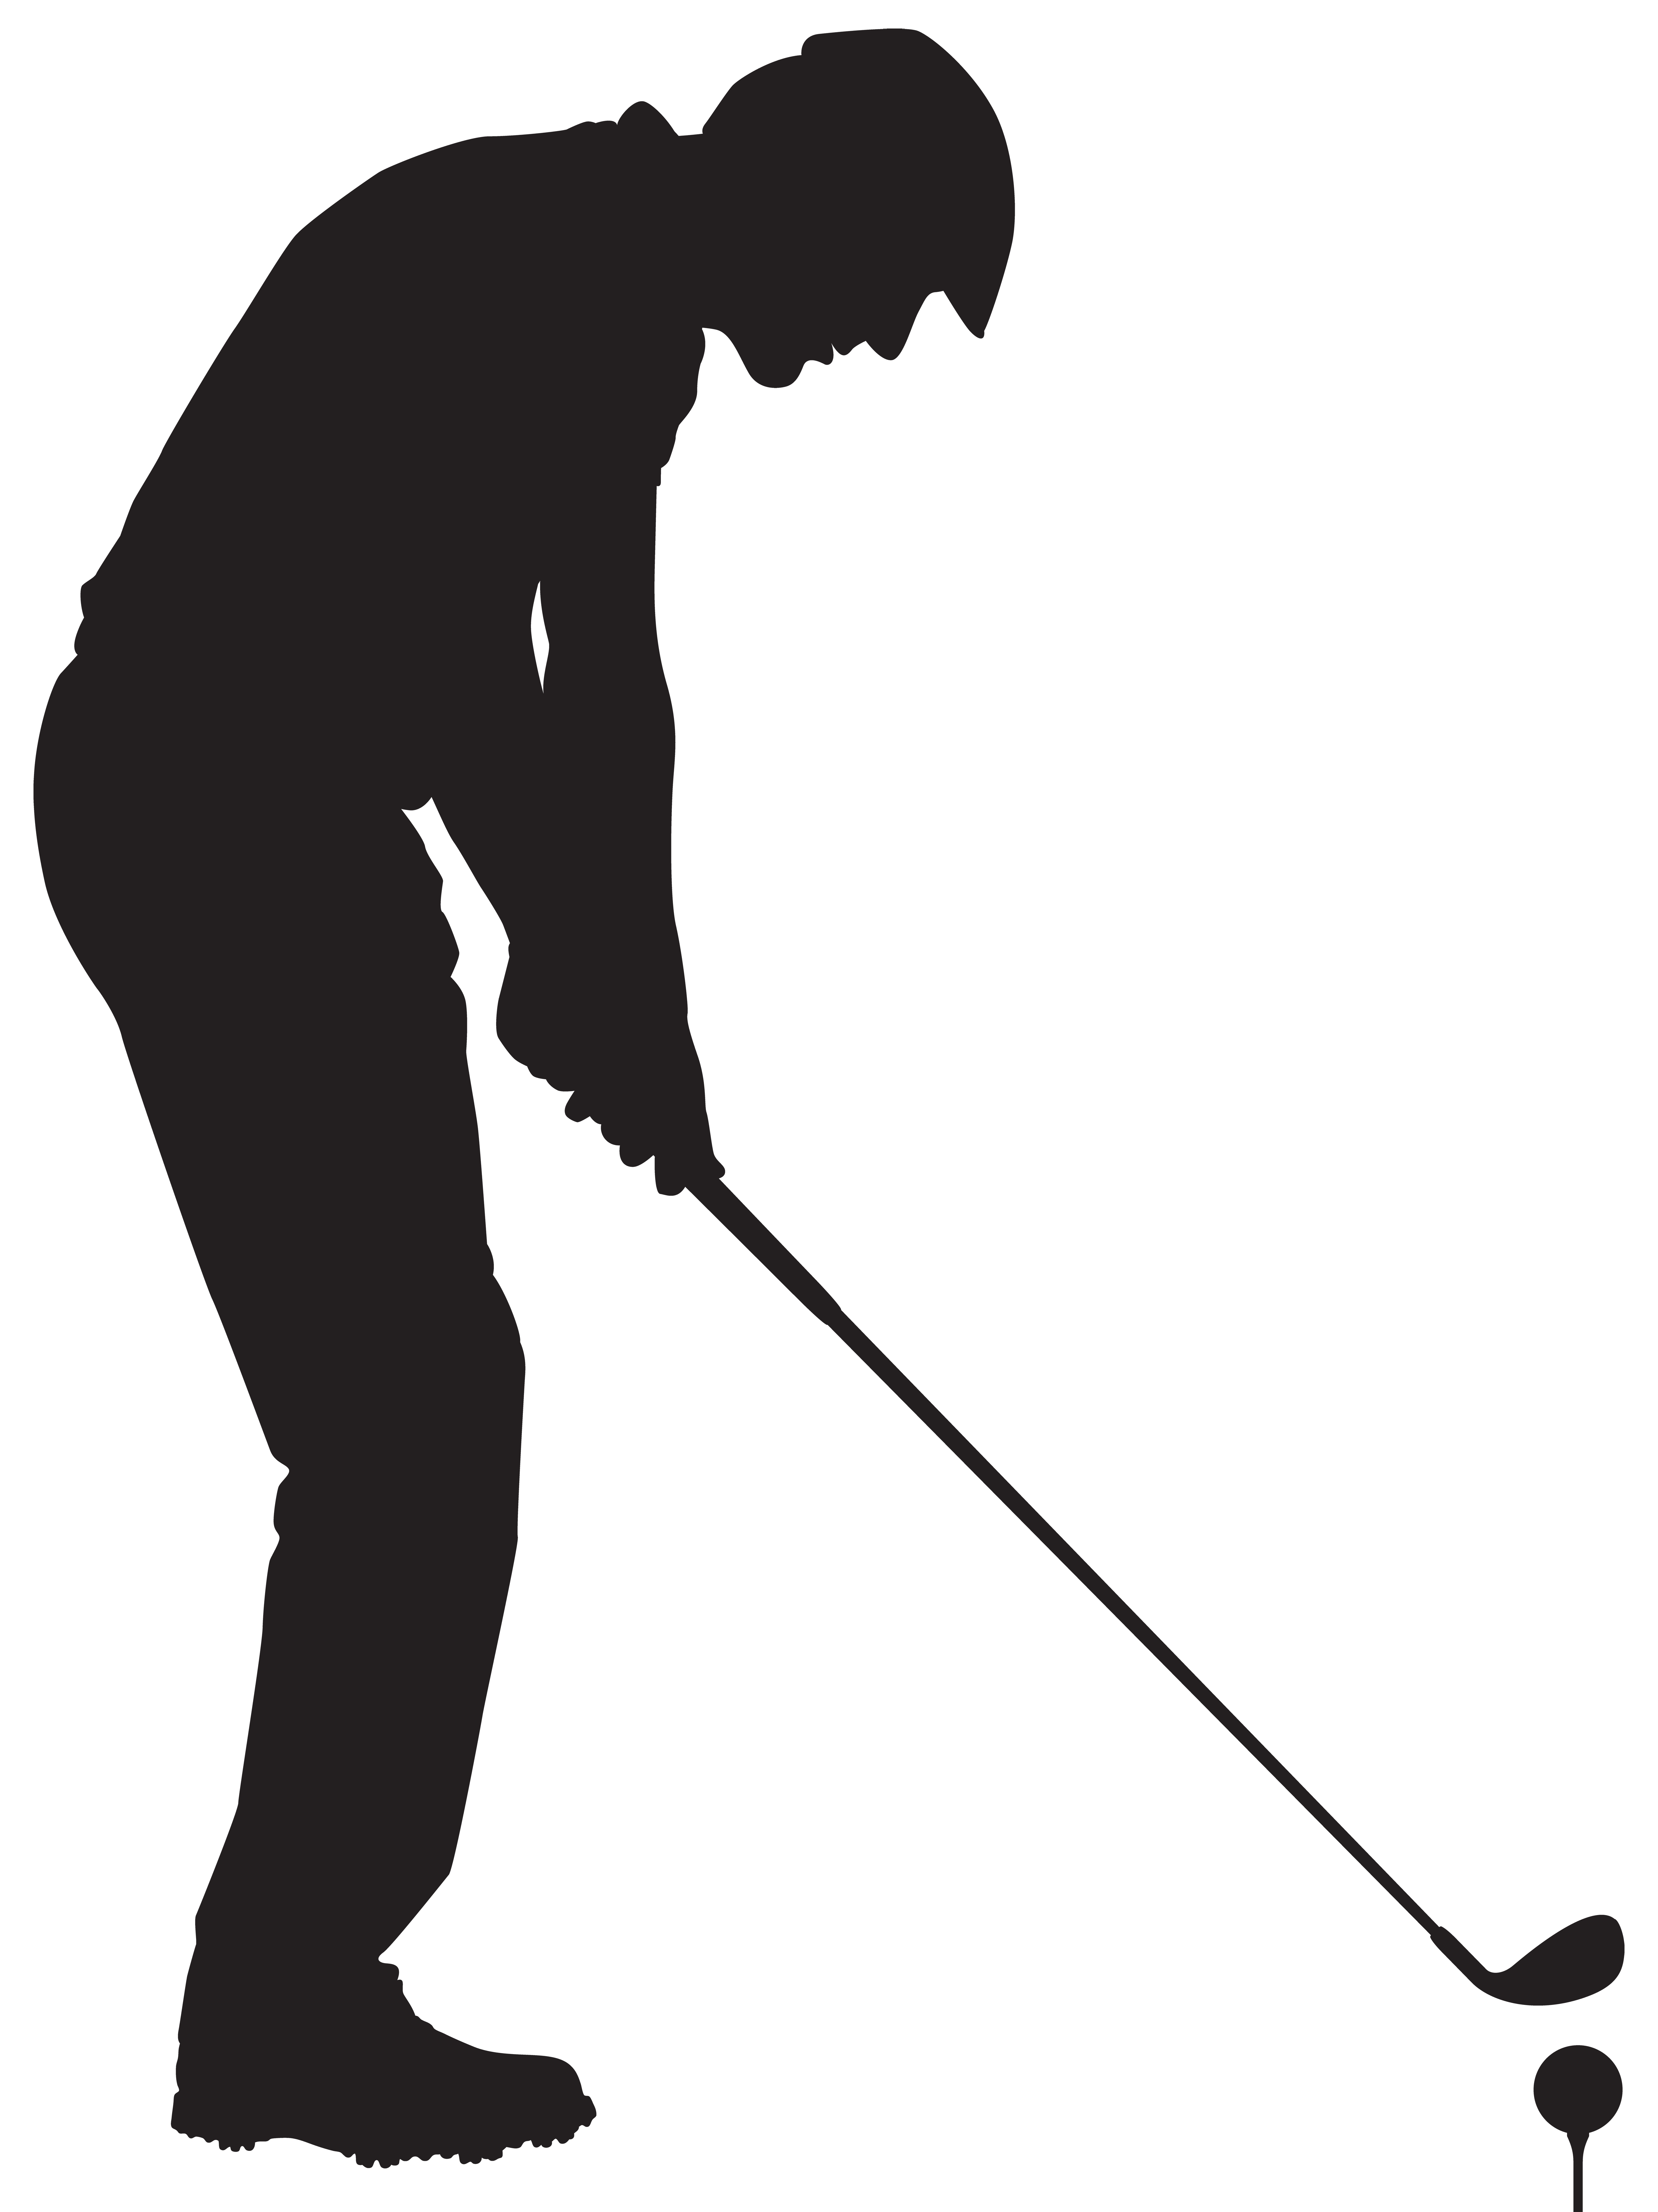 Man Playing Golf Silhouette PNG Clip Art Image